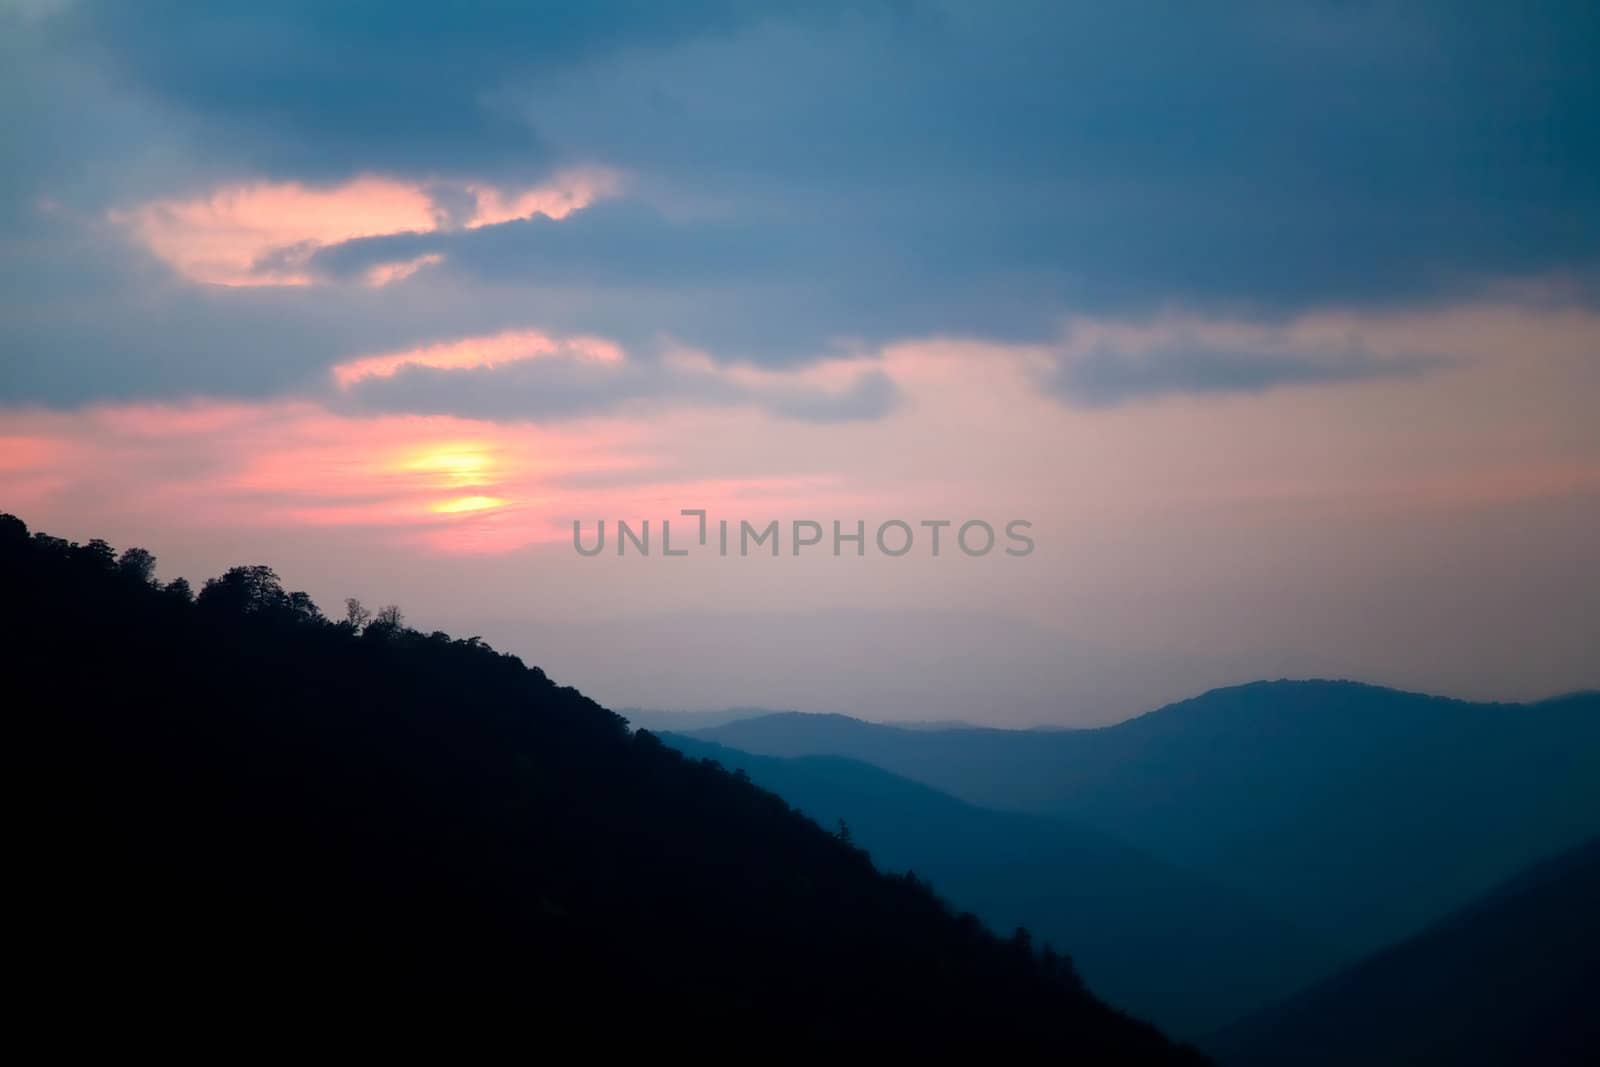 An image of a sunset in the mountains